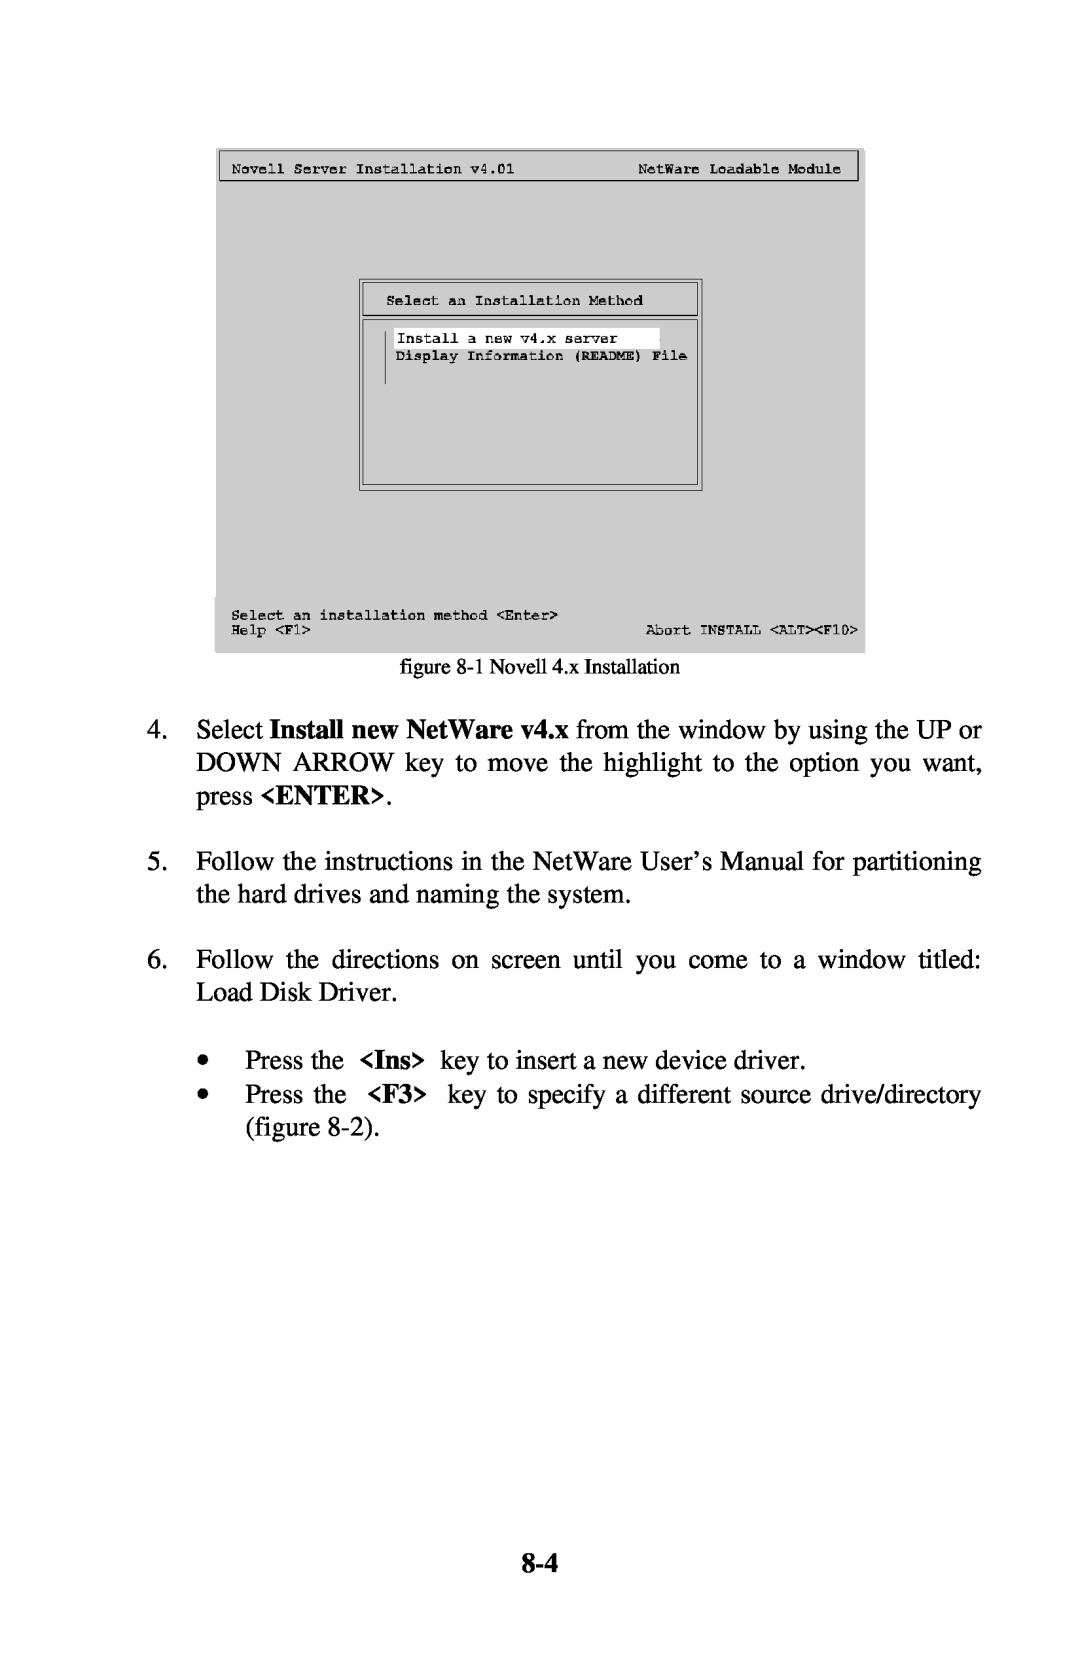 Initio INI-9100UW user manual ∙ Press the Ins key to insert a new device driver 